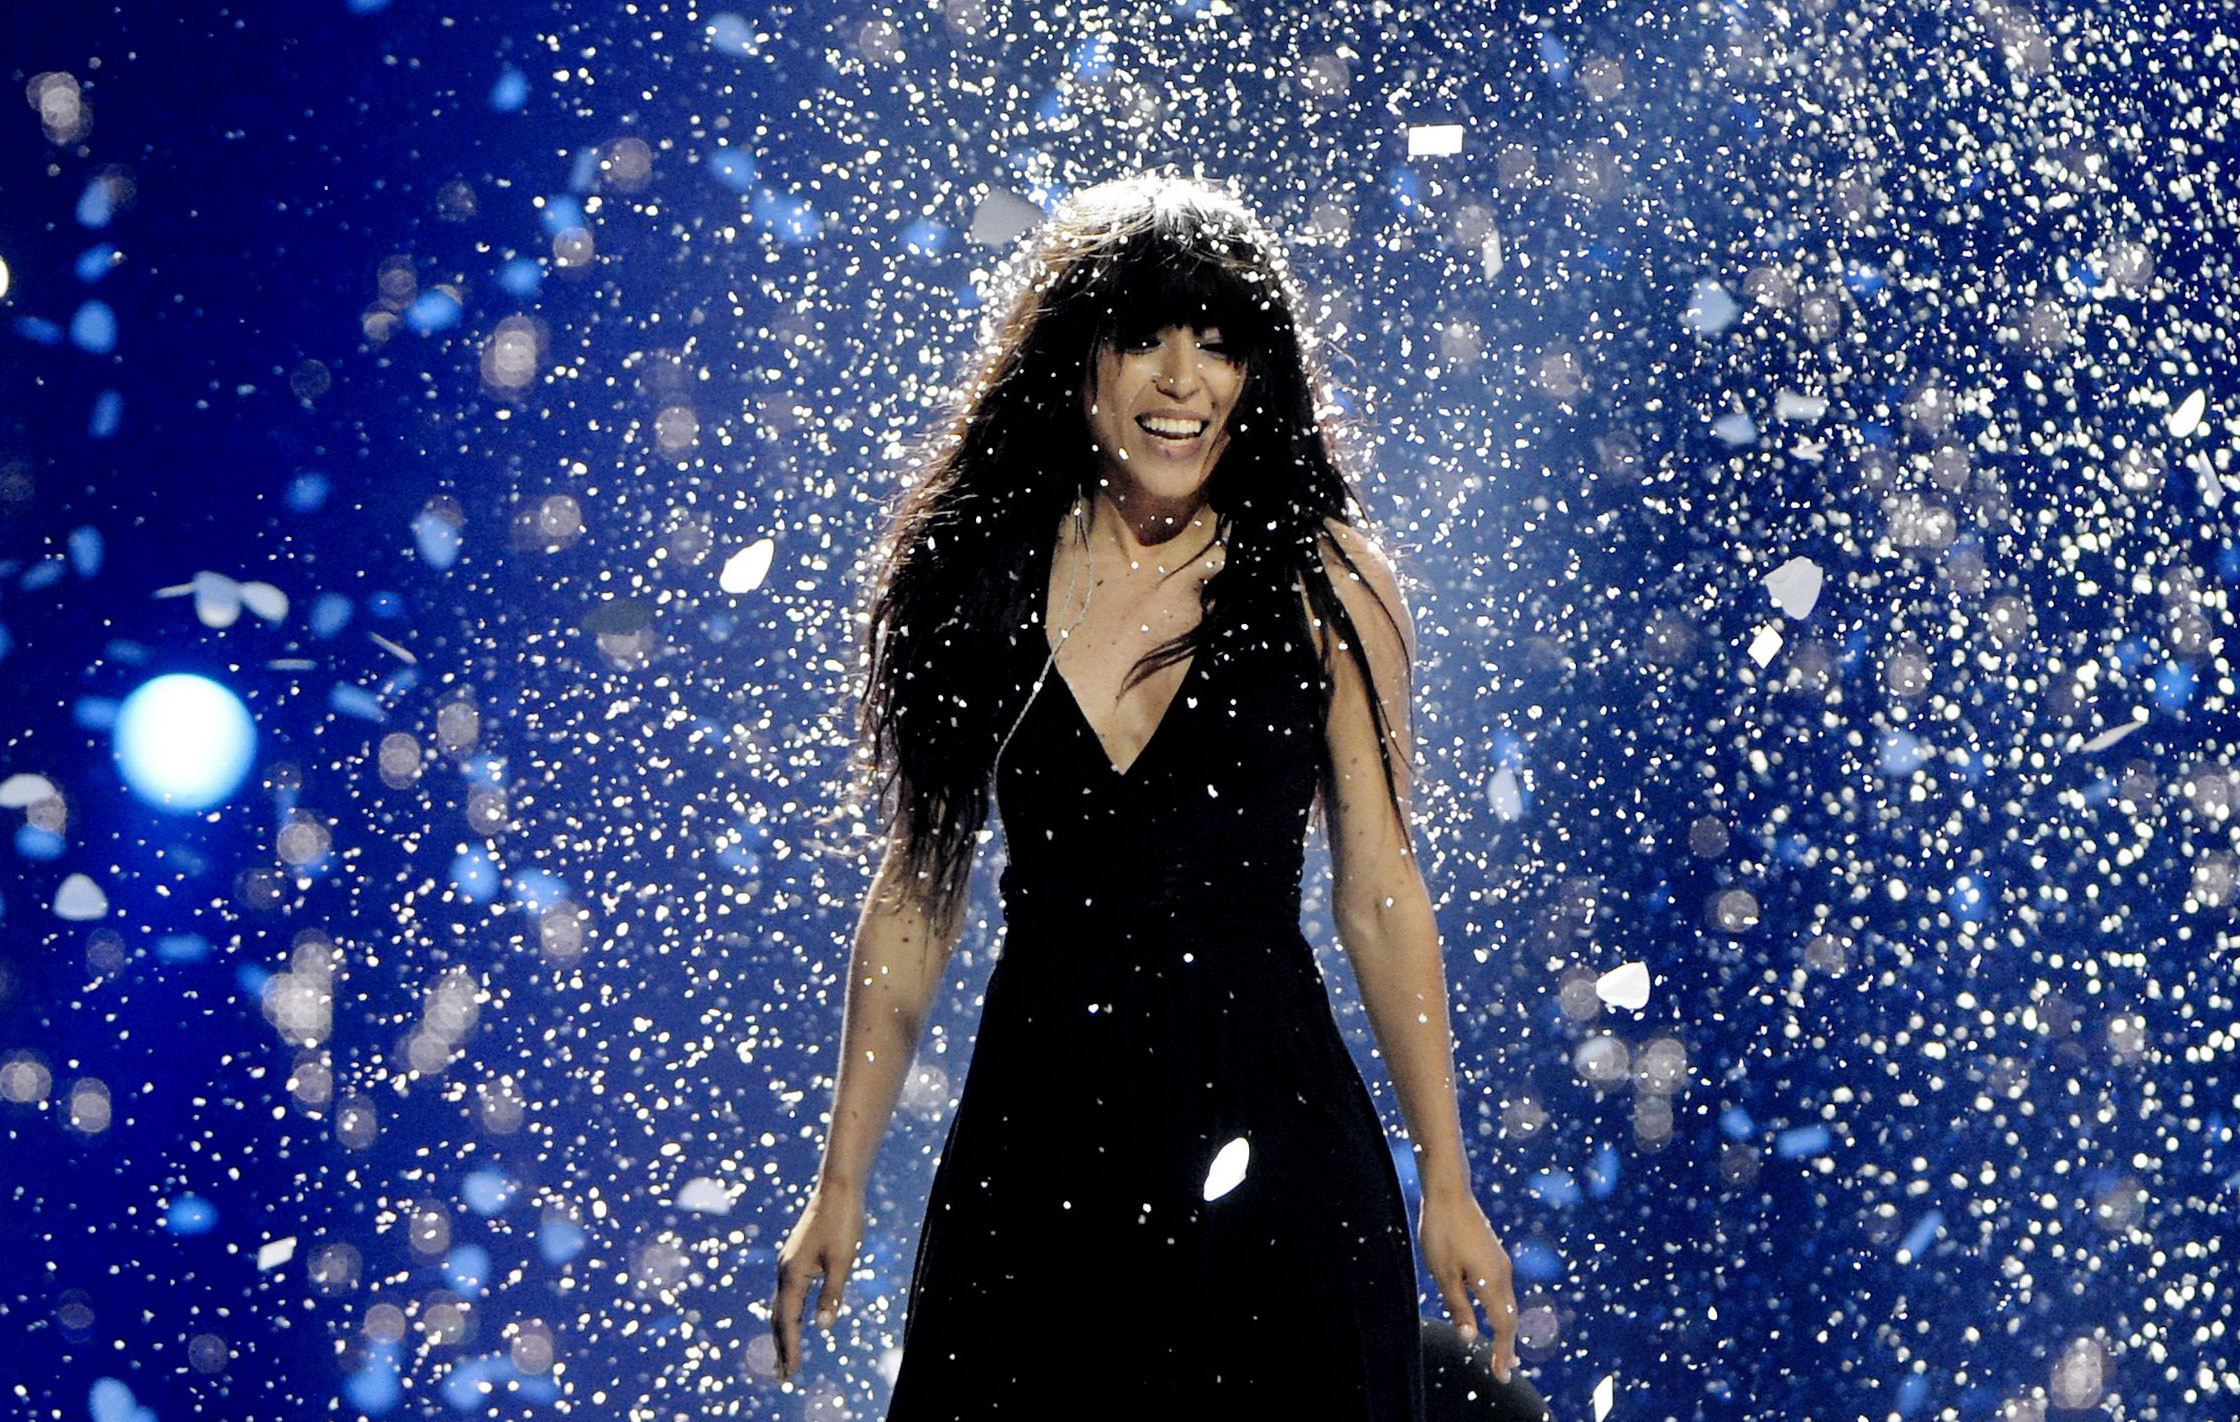 2240x1422 Loreen in the final concert on stage wallpapers and images .